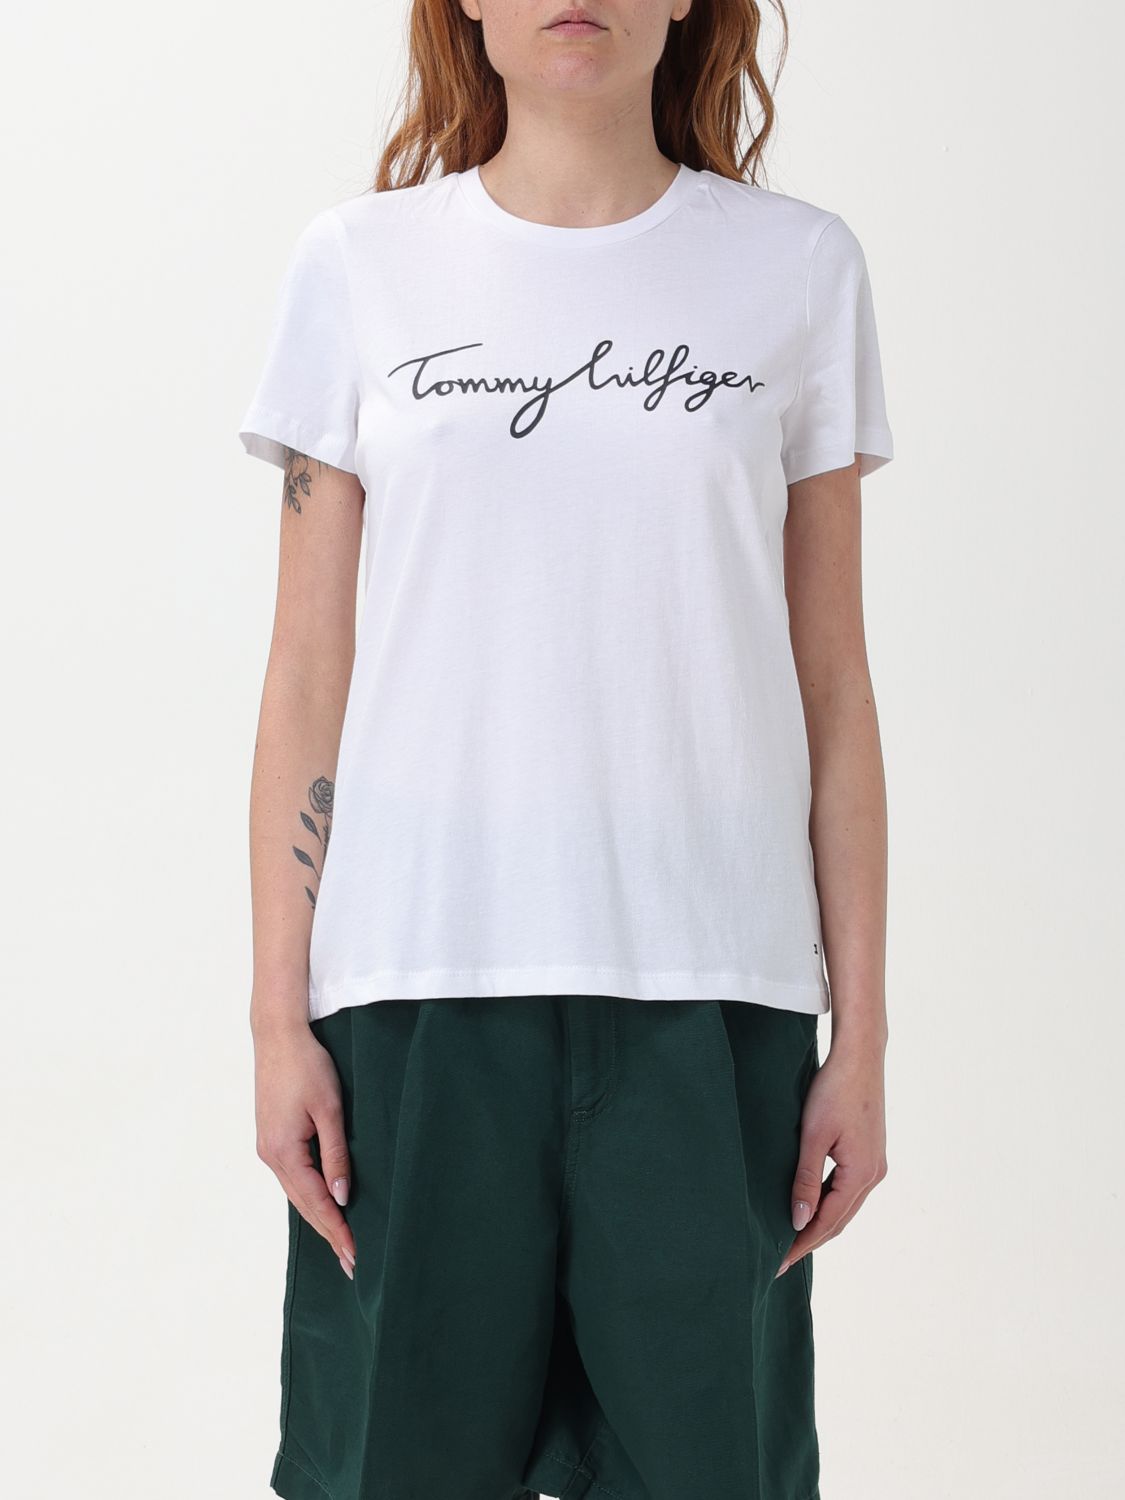 Tommy Hilfiger T-Shirt TOMMY HILFIGER Woman color White